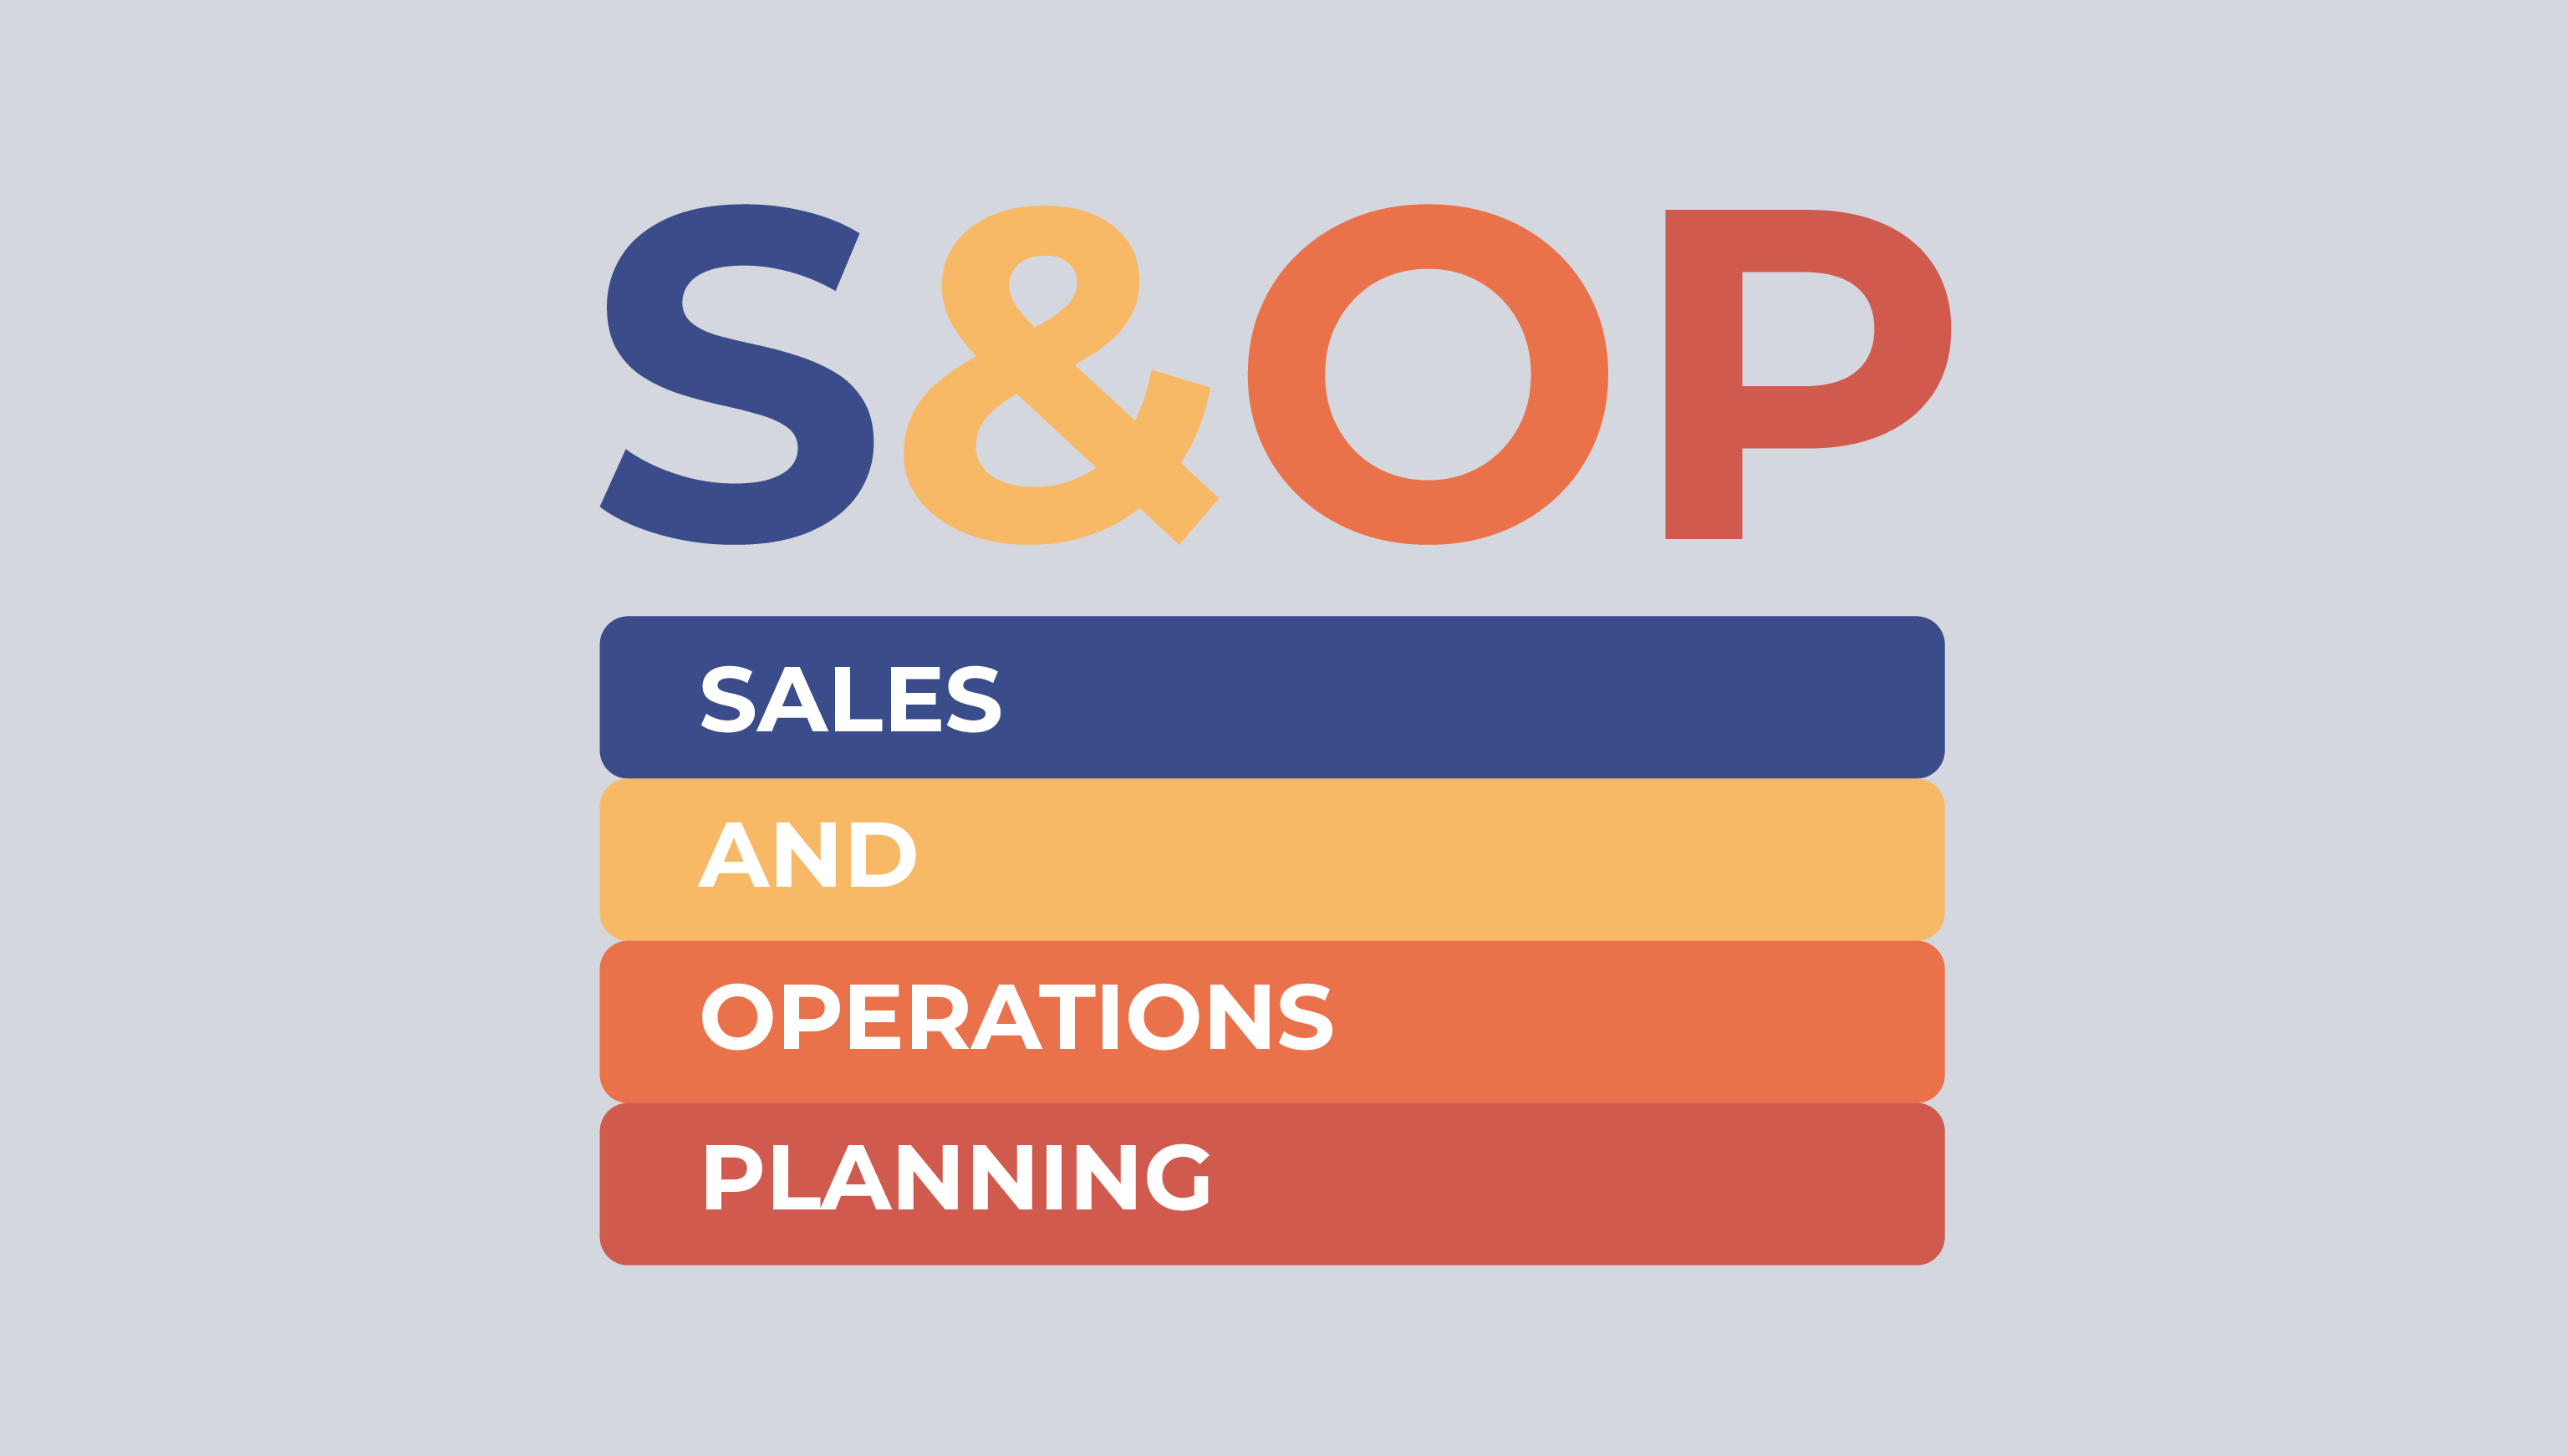 O que e S&OP - Sales and Operations Planning